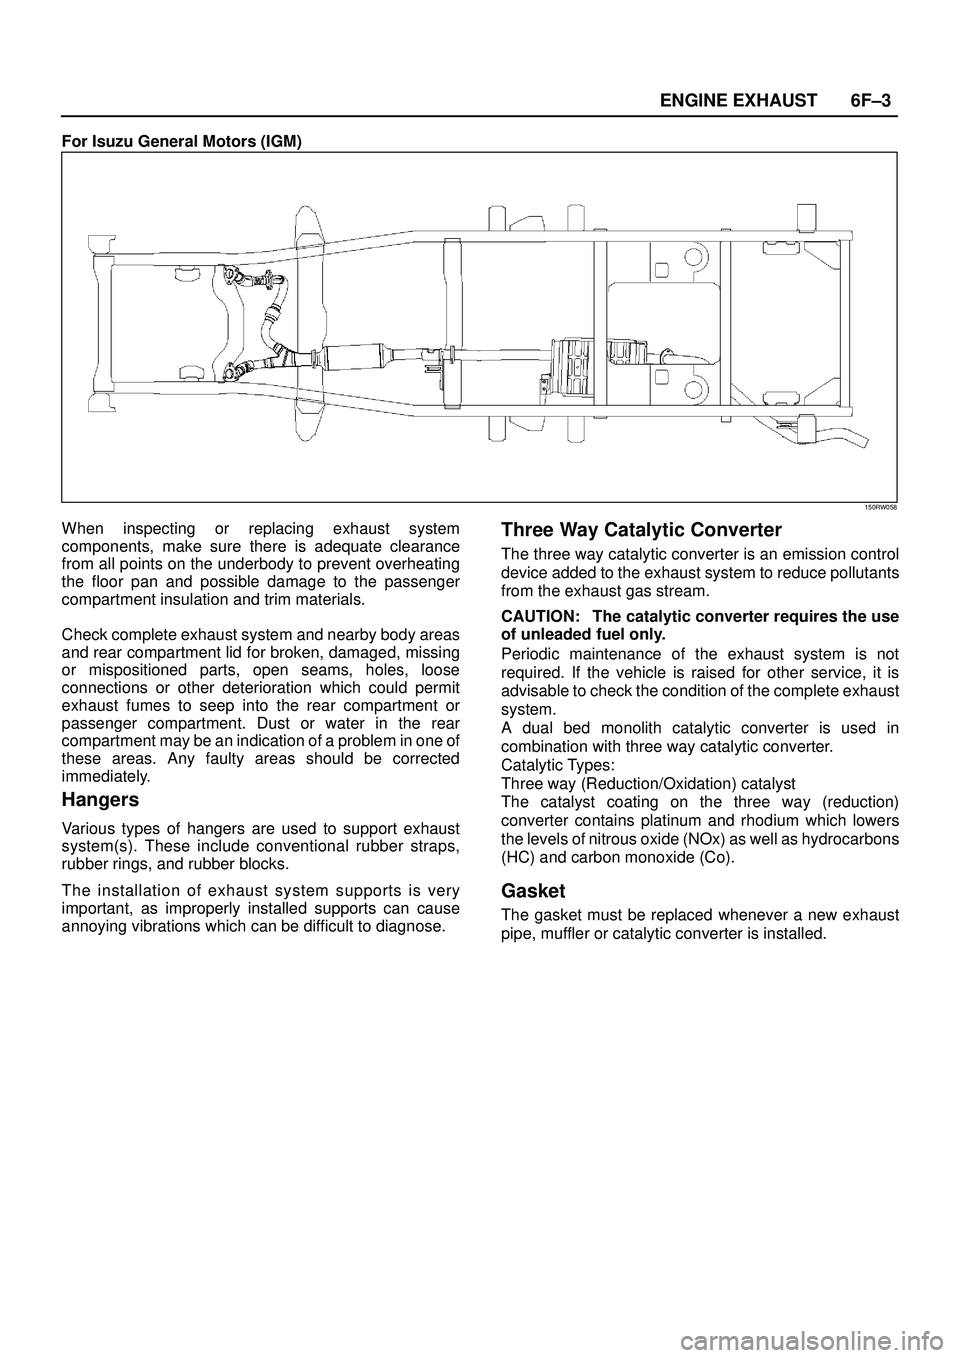 ISUZU TROOPER 1998  Service Repair Manual 6F±3 ENGINE EXHAUST
For Isuzu General Motors (IGM)
150RW058
When inspecting or replacing exhaust system
components, make sure there is adequate clearance
from all points on the underbody to prevent o